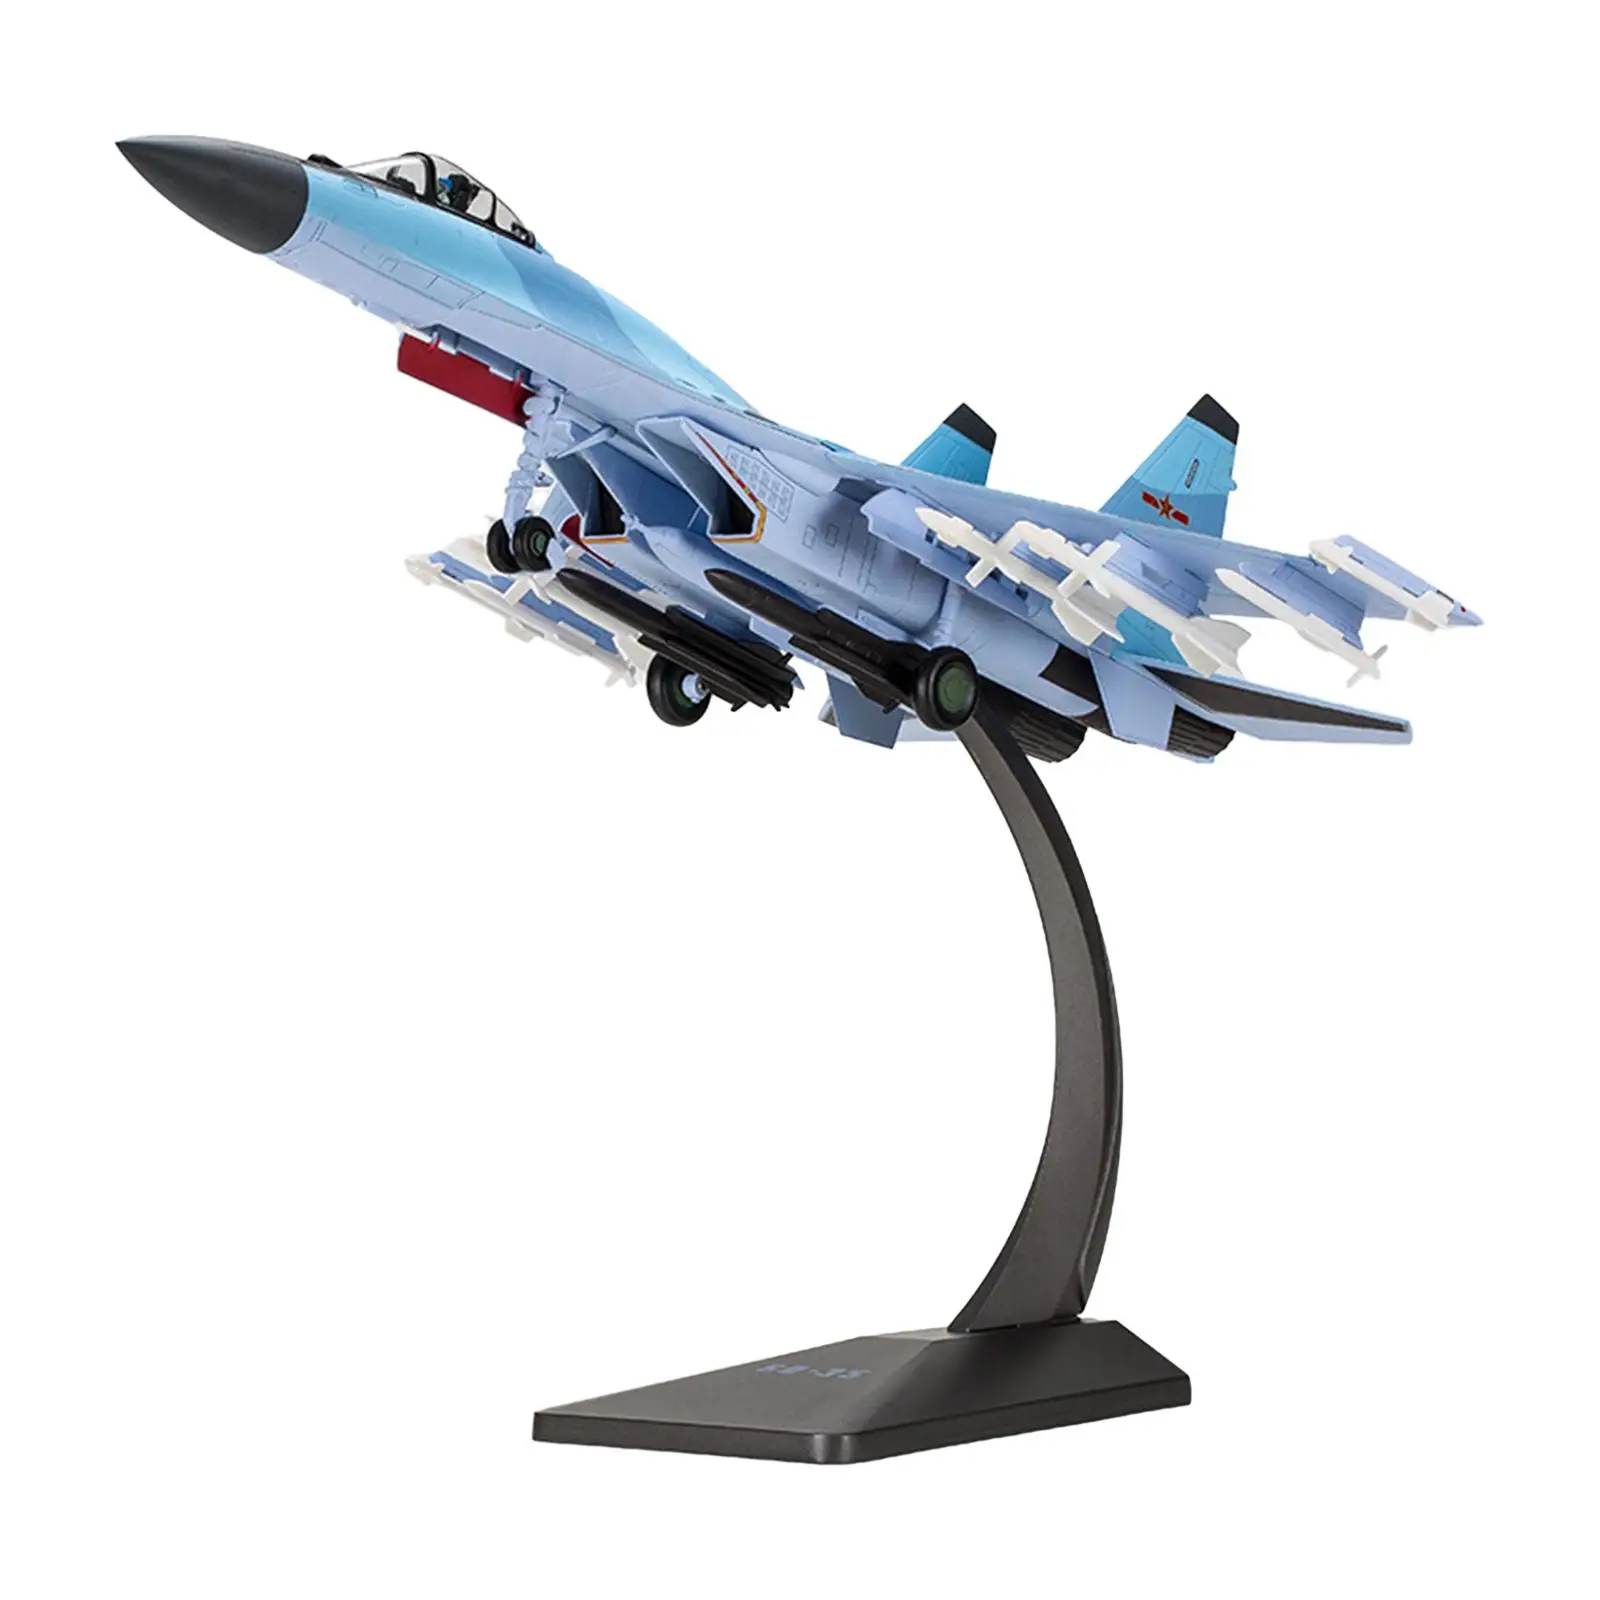 

1/48 SU35 Aircraft Collectibles Diecast Alloy Fighter Plane Model Airplane with Stand for Home Cafes Bookshelf Office Livingroom